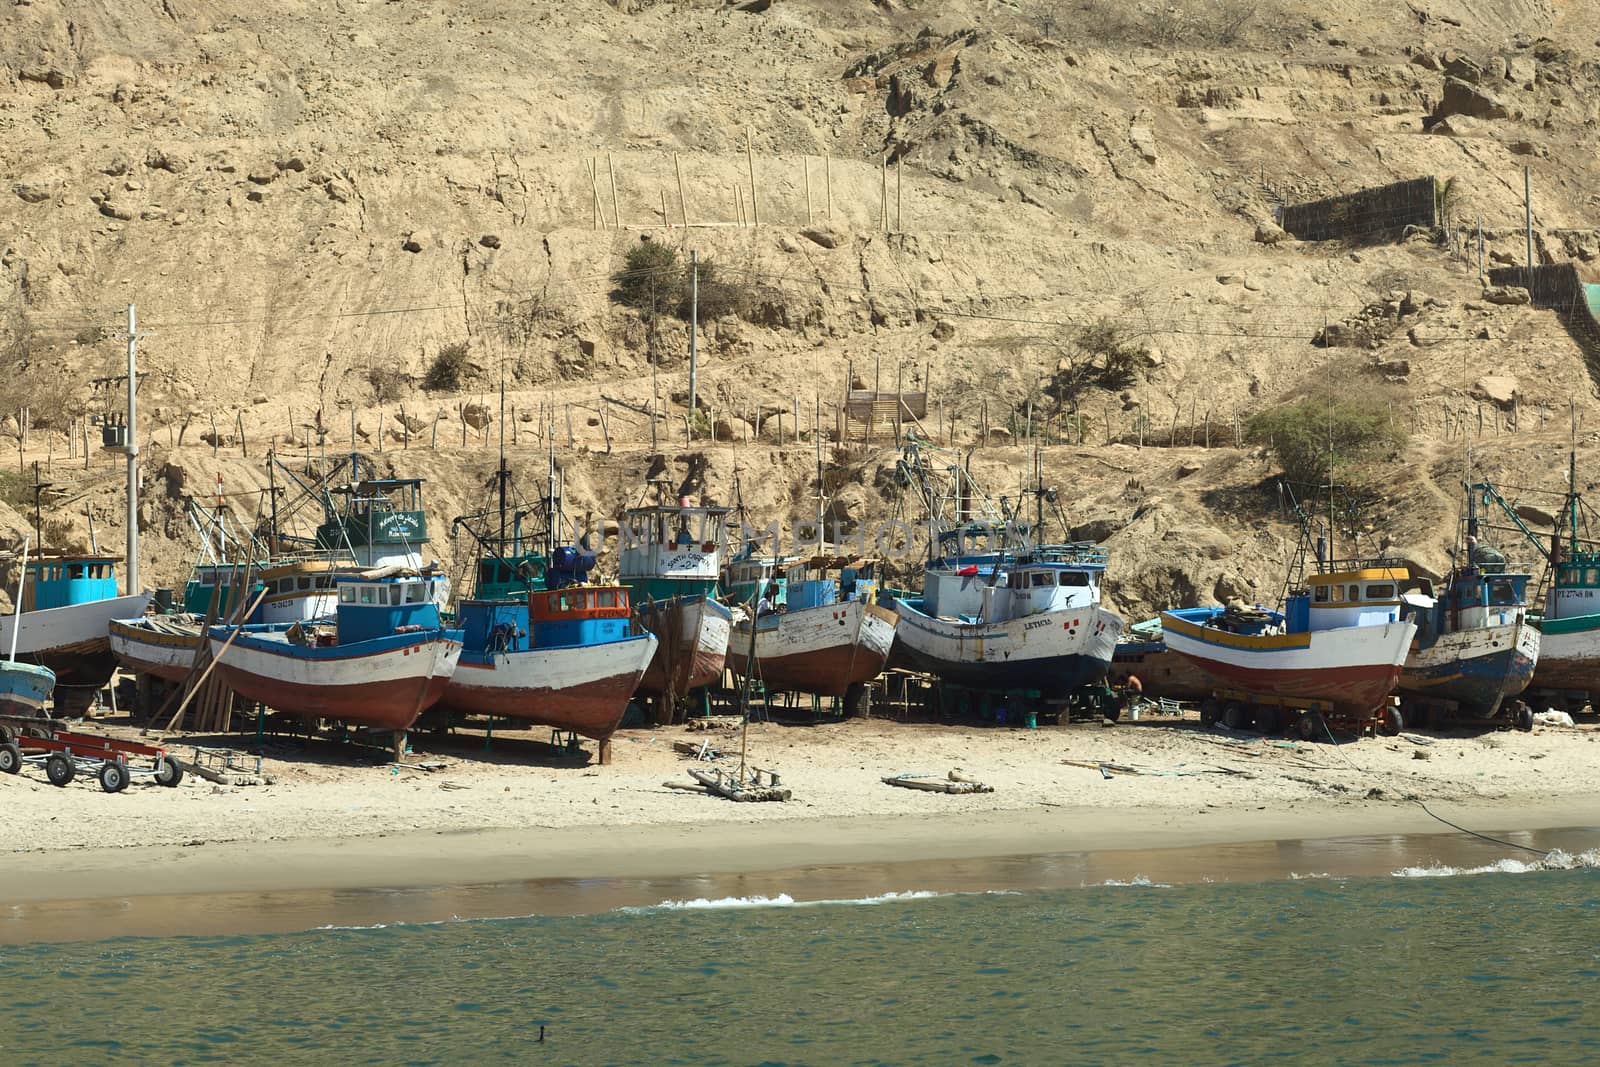 Wooden Fishing Boats in Mancora, Peru by sven